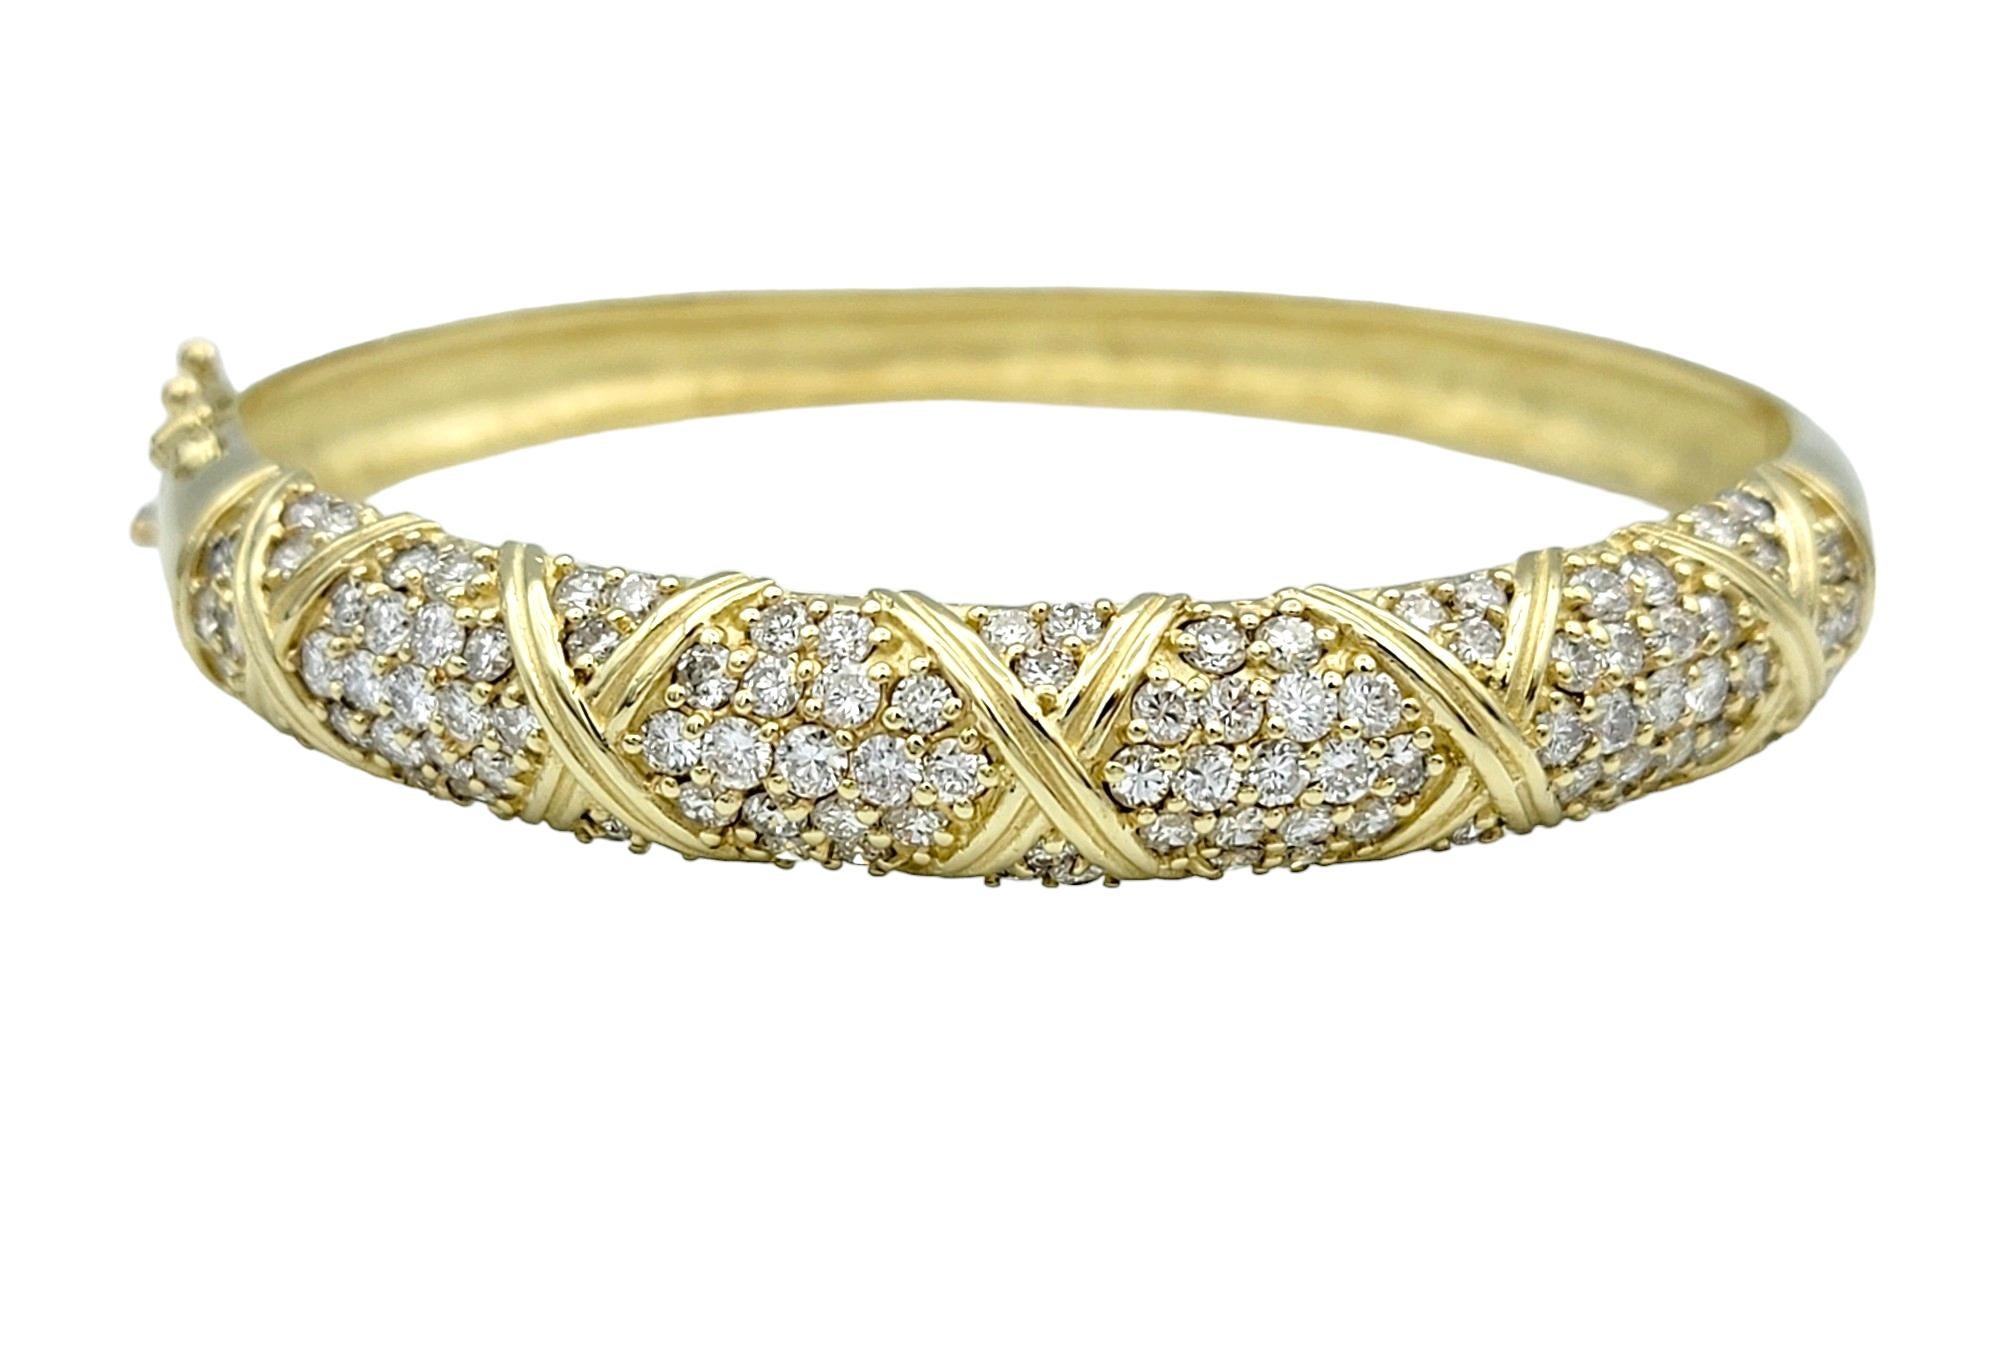 Radiating opulence and sophistication, this diamond bracelet, exquisitely set in lustrous 14 karat yellow gold, epitomizes timeless elegance and luxury. Adorning the bangle bracelet are dazzling diamonds meticulously encrusted throughout, their